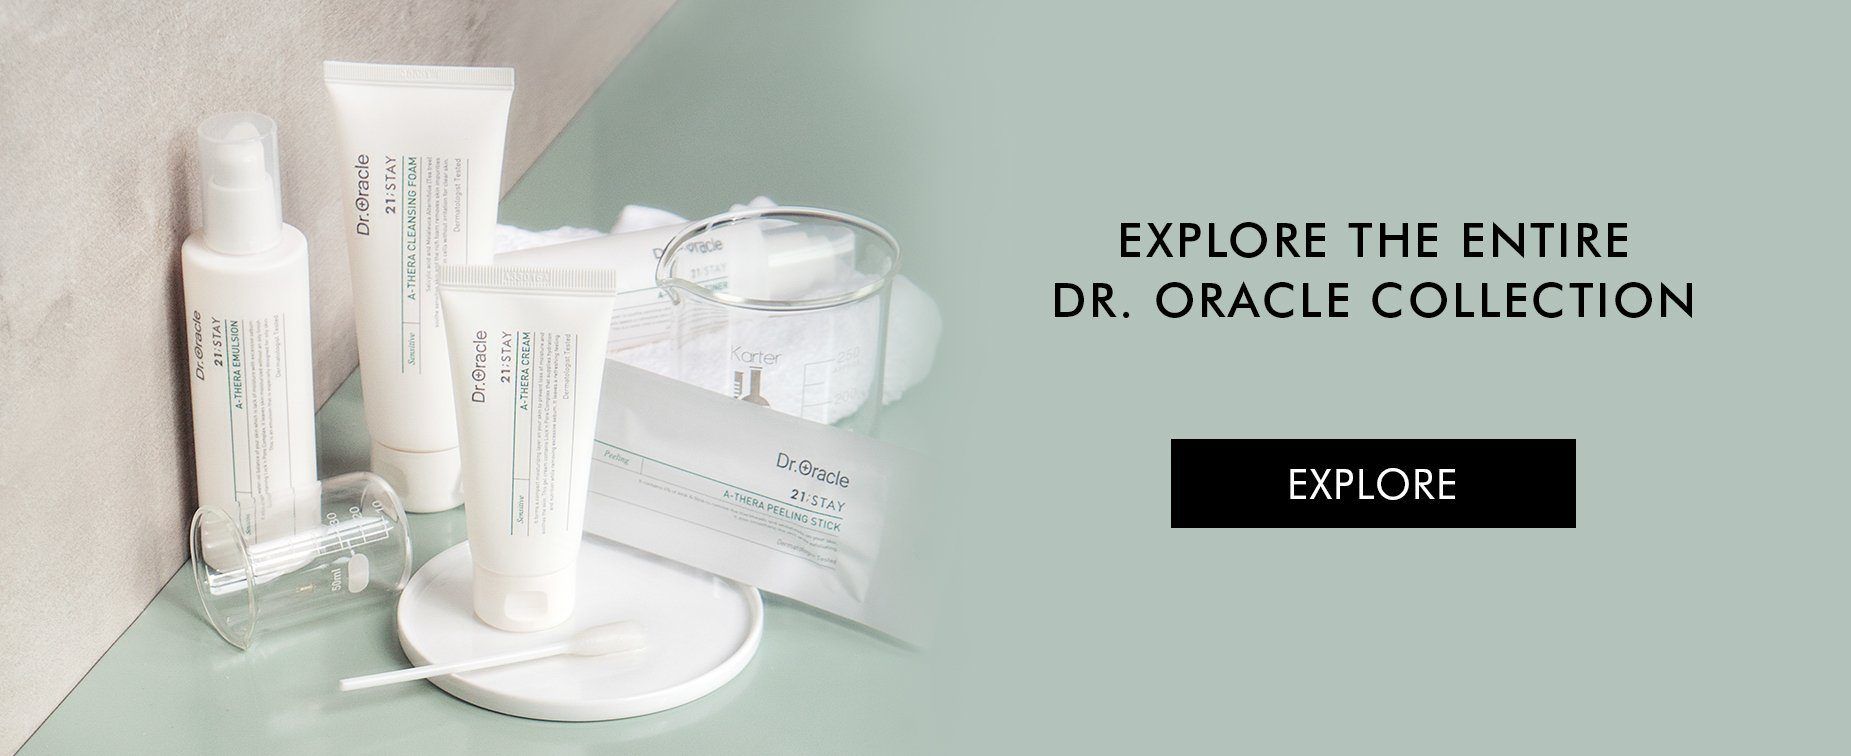 Explore the entire Dr. Oracle Collection